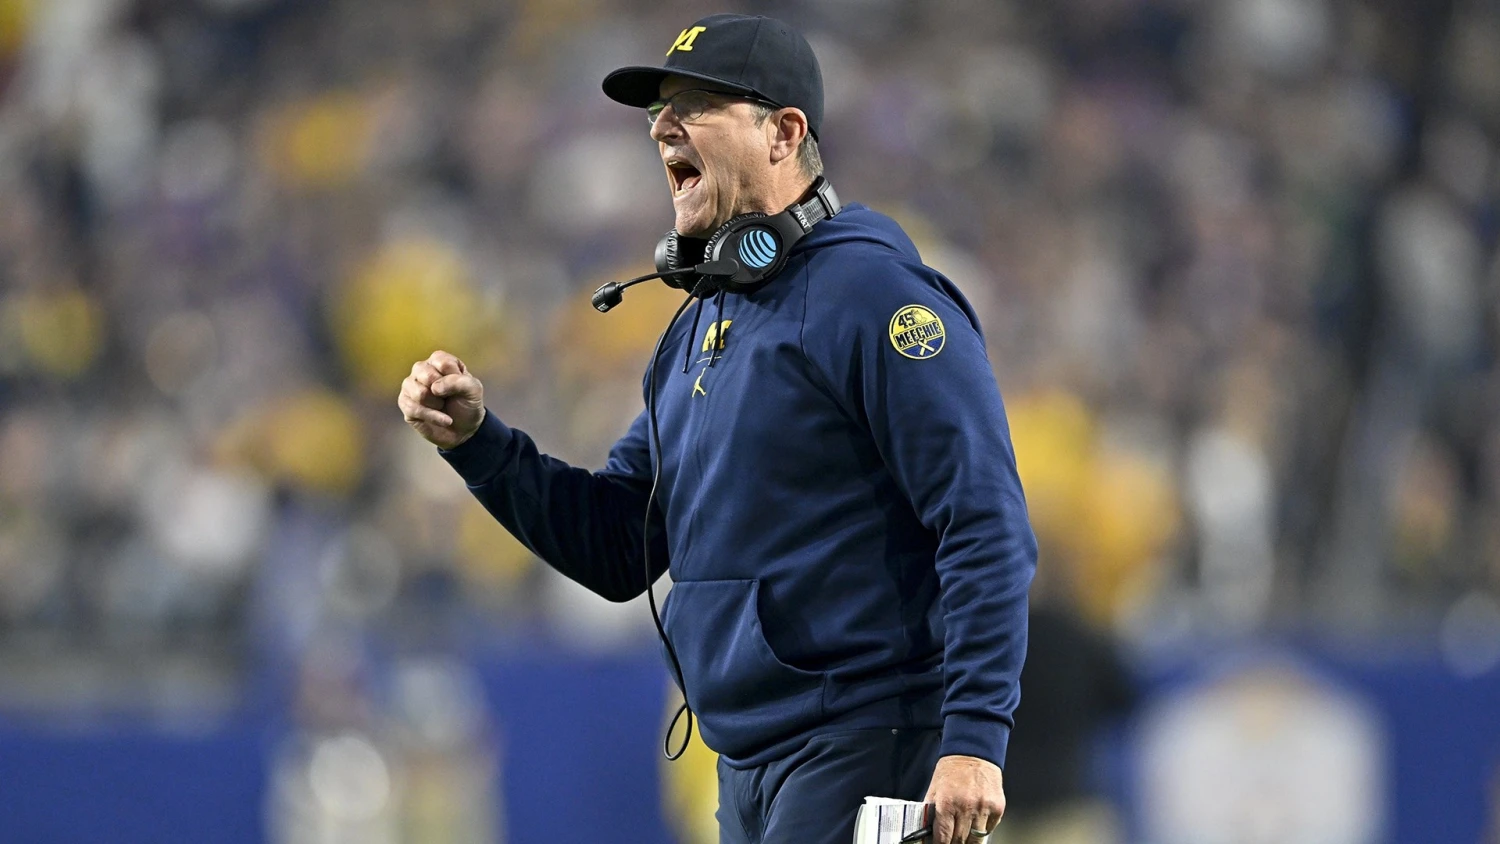 Los Angeles Chargers head coach Jim Harbaugh returns